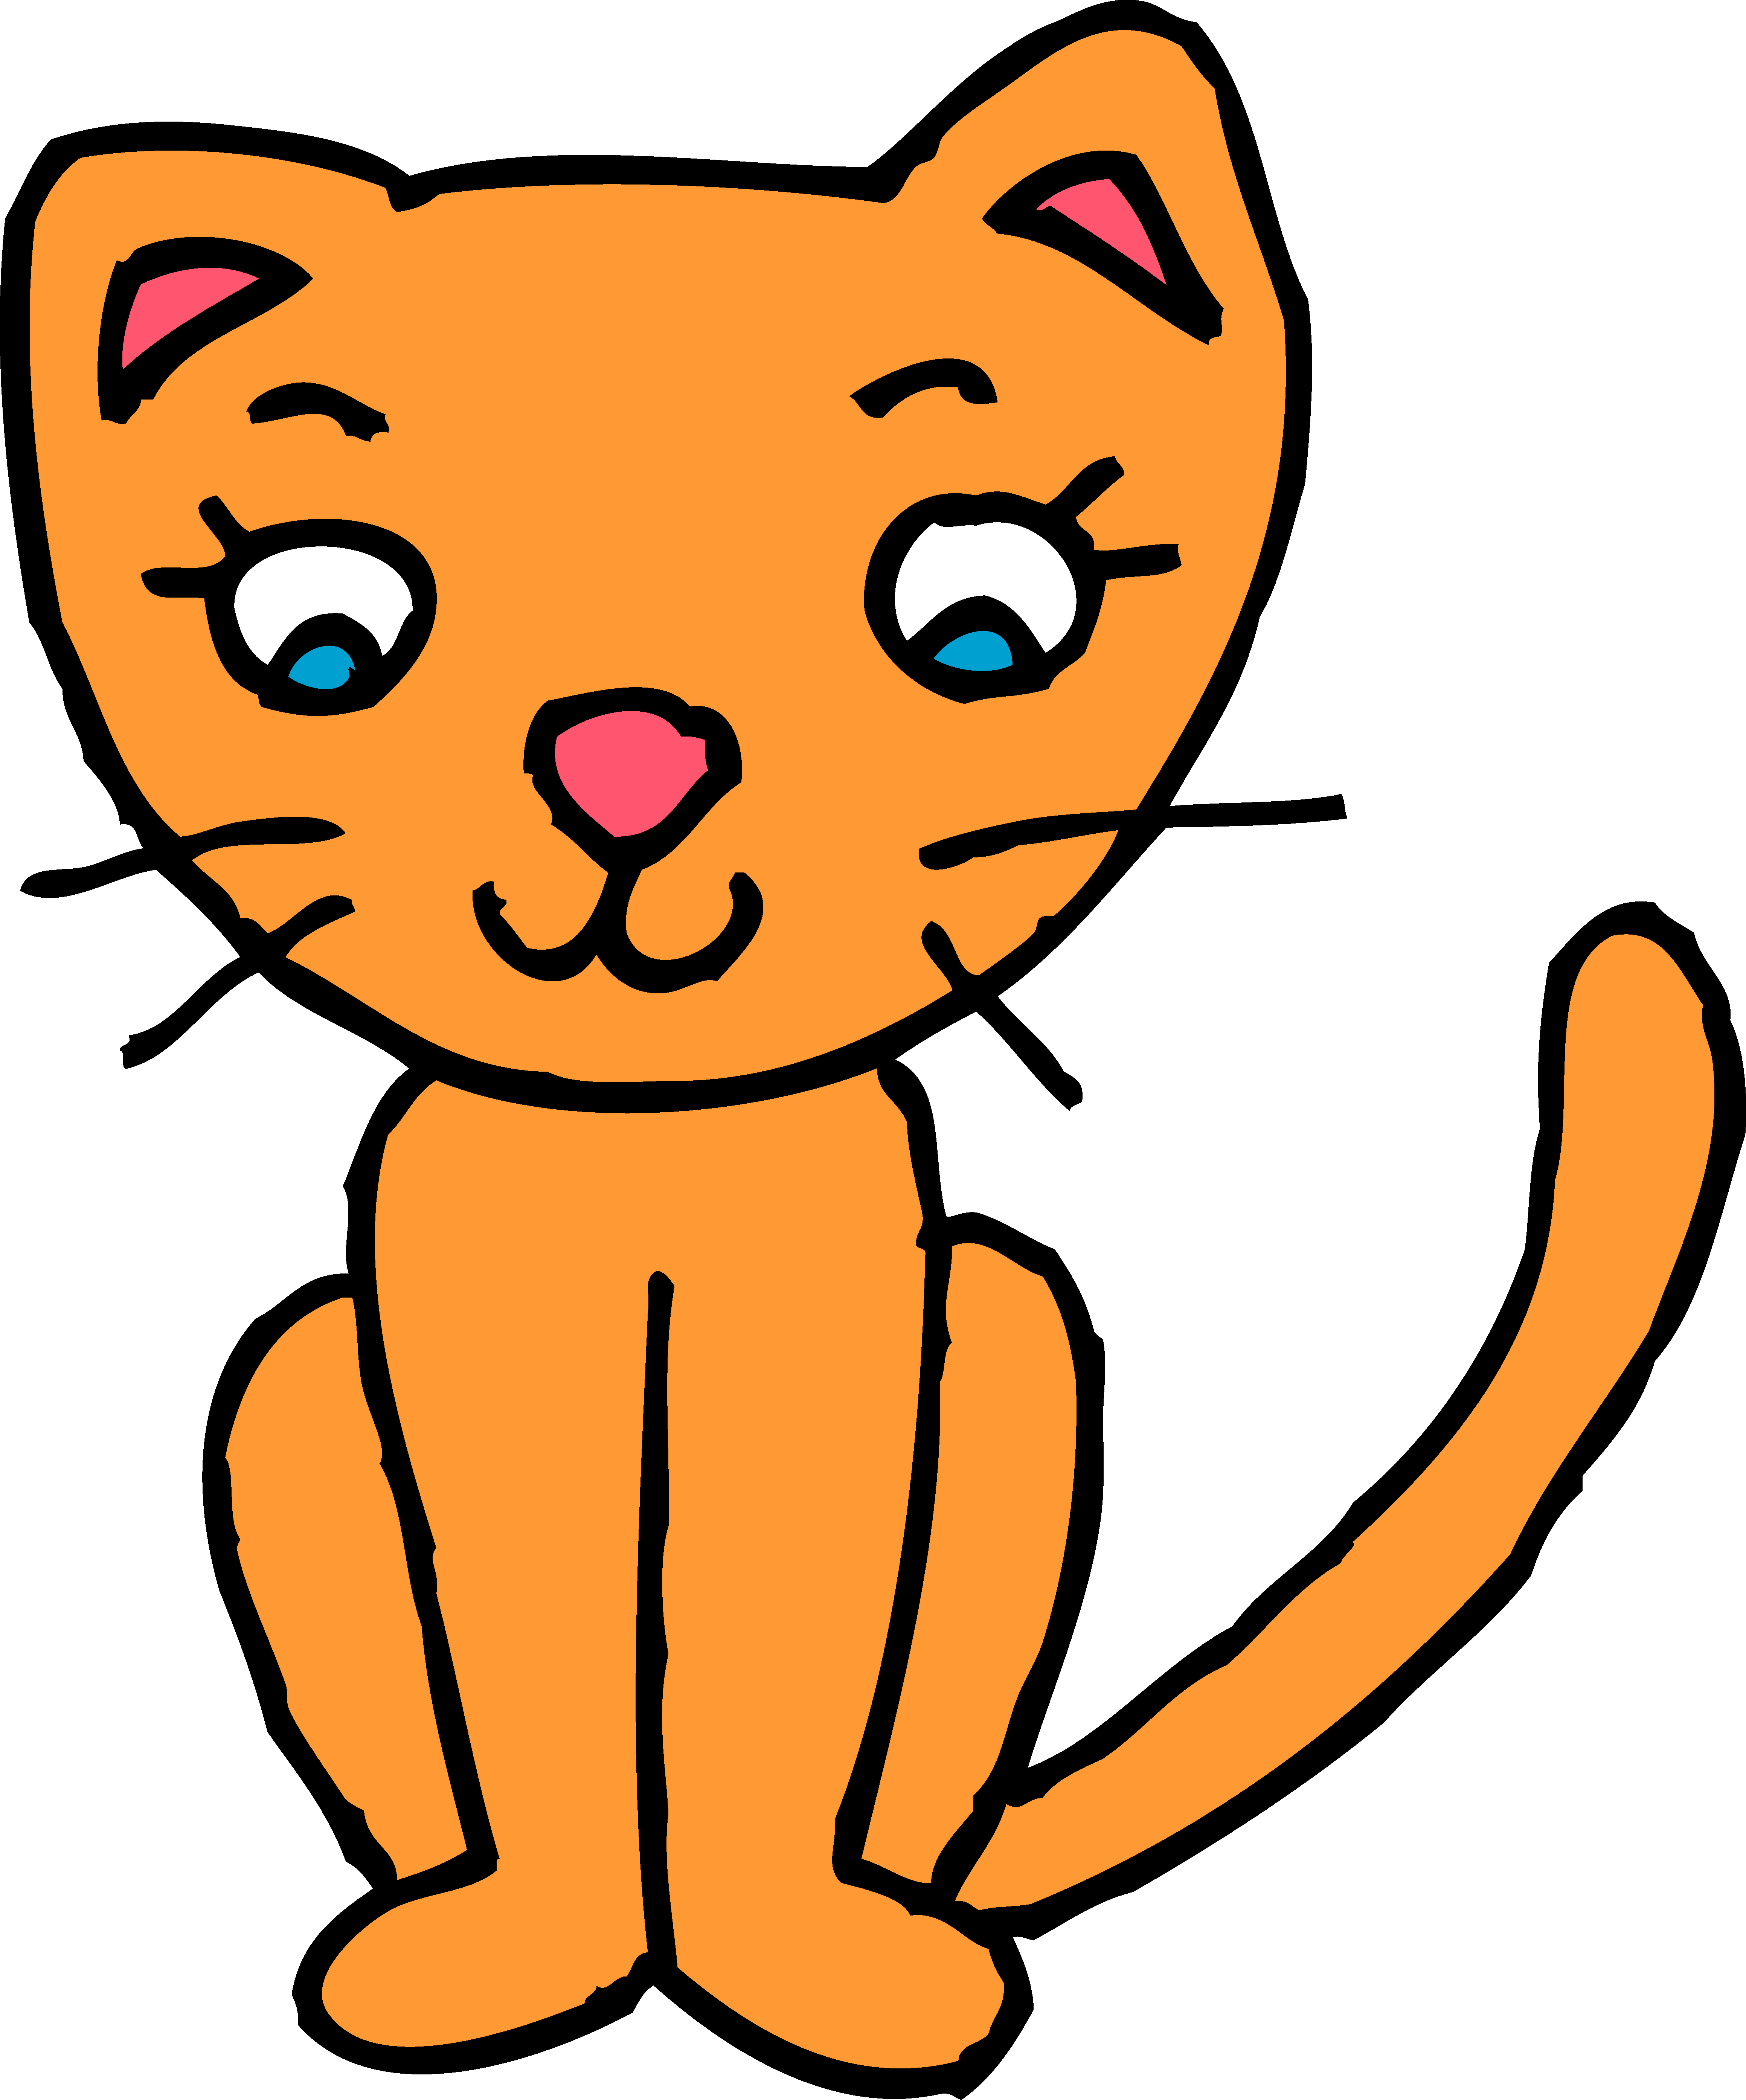 Free cat and kittens clip art